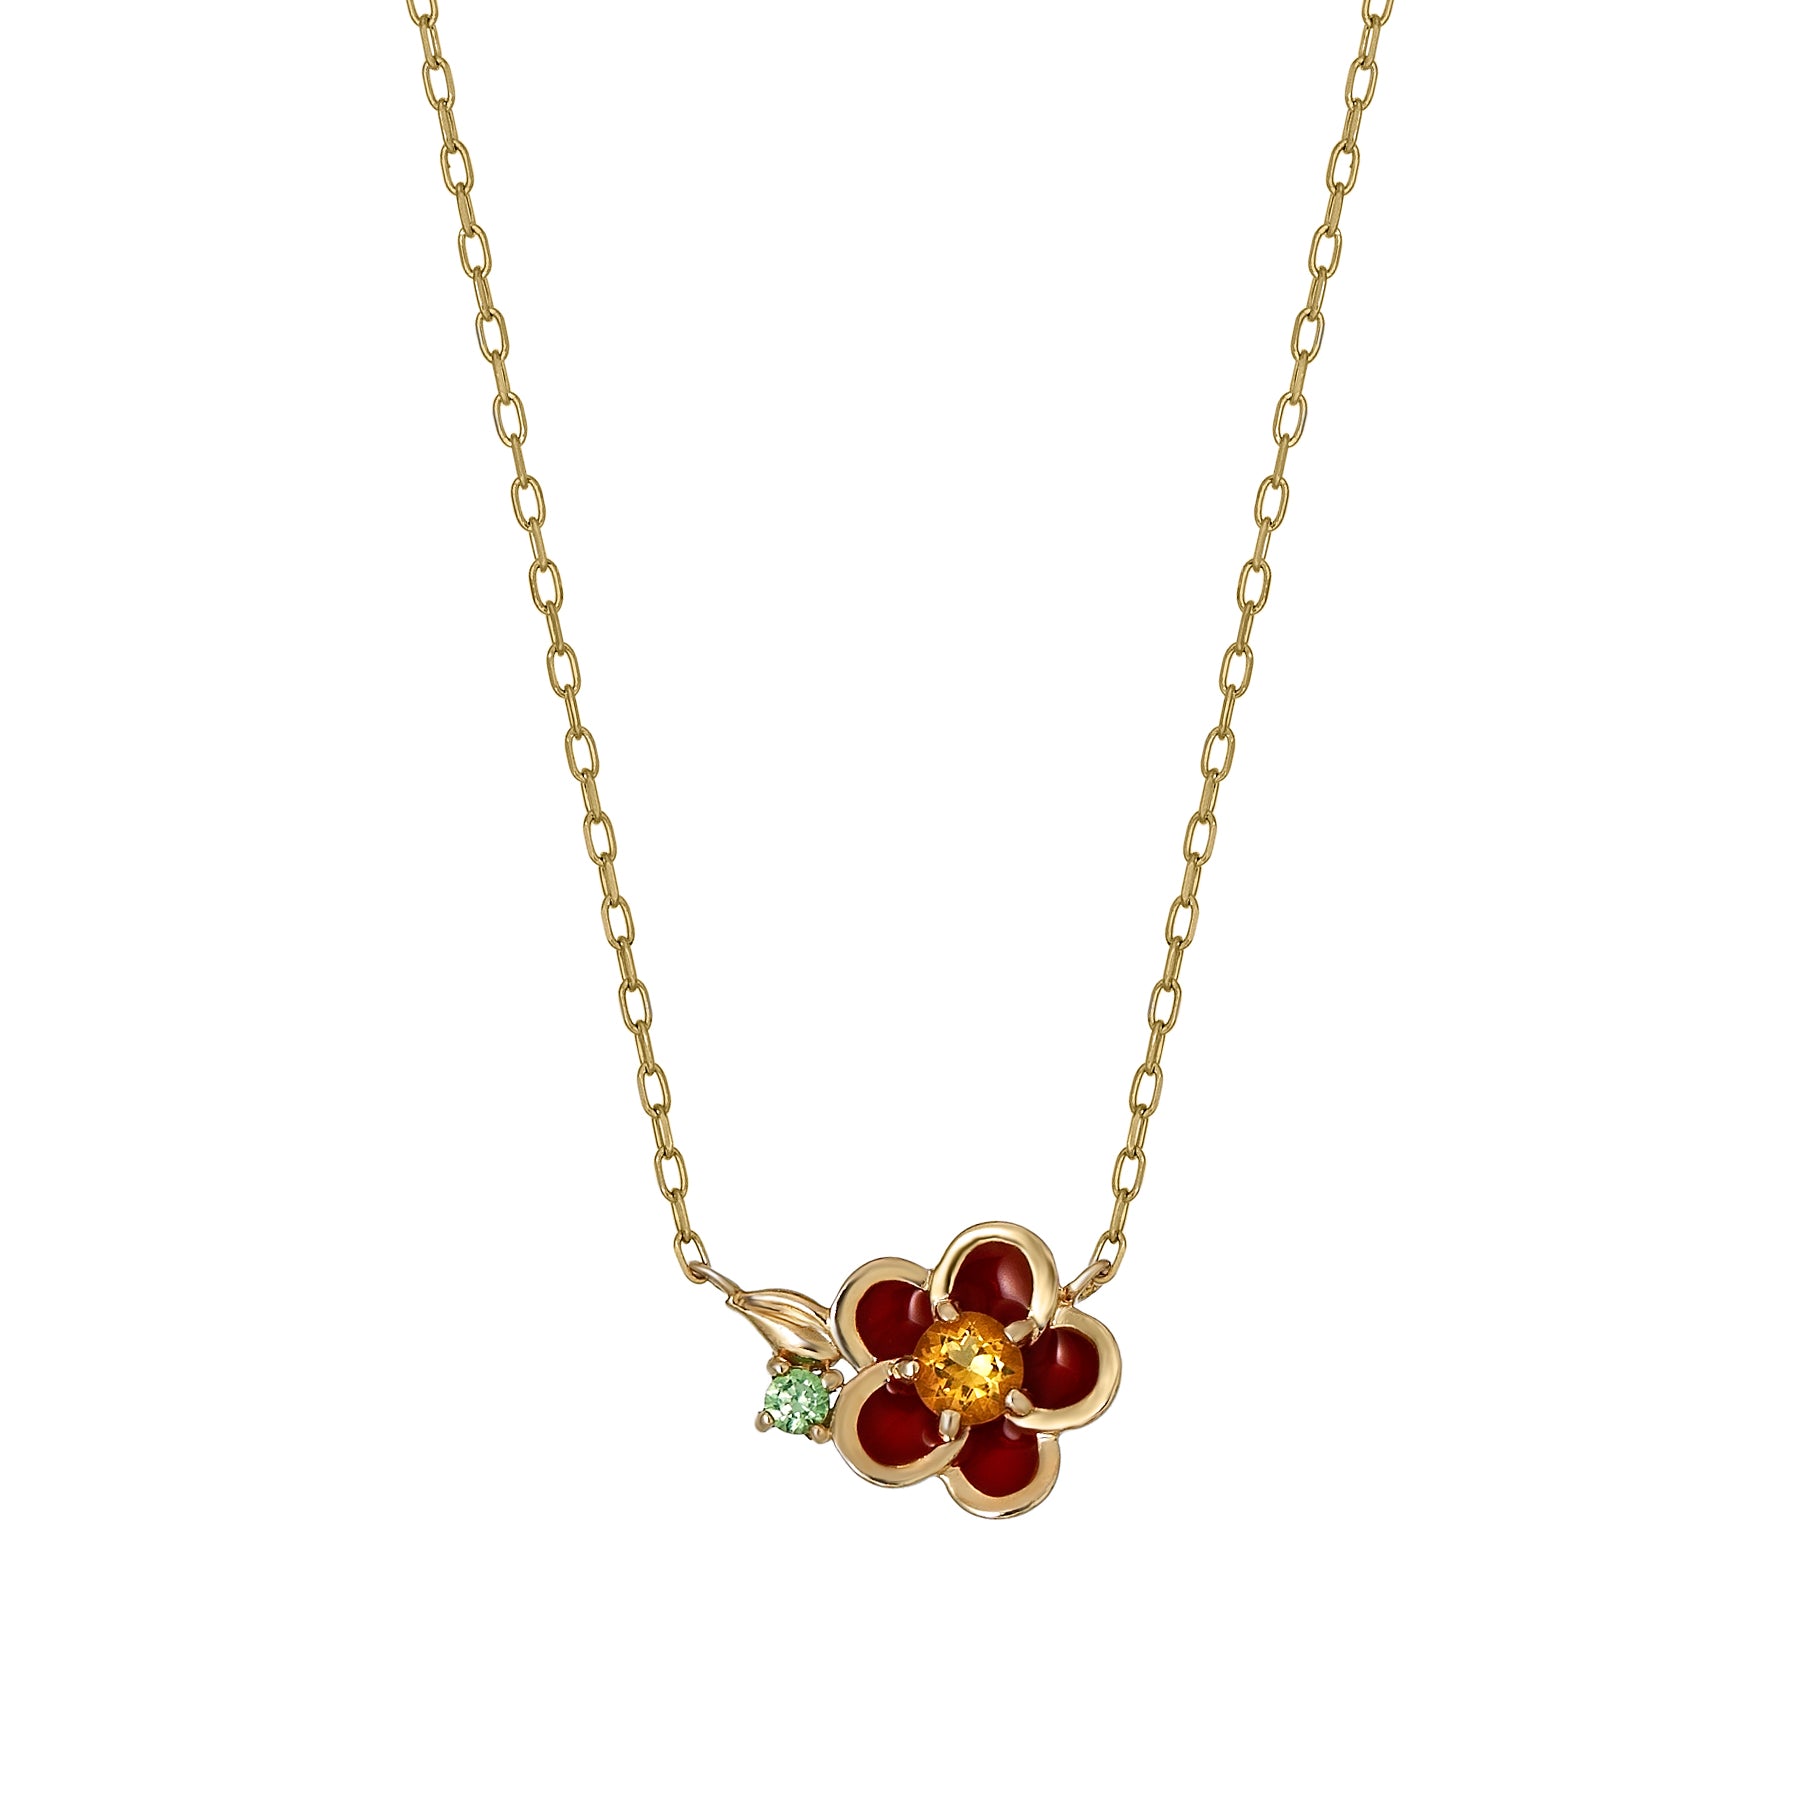 [Birth Flower Jewelry] November - Camellia Necklace (10K Yellow Gold) - Product Image